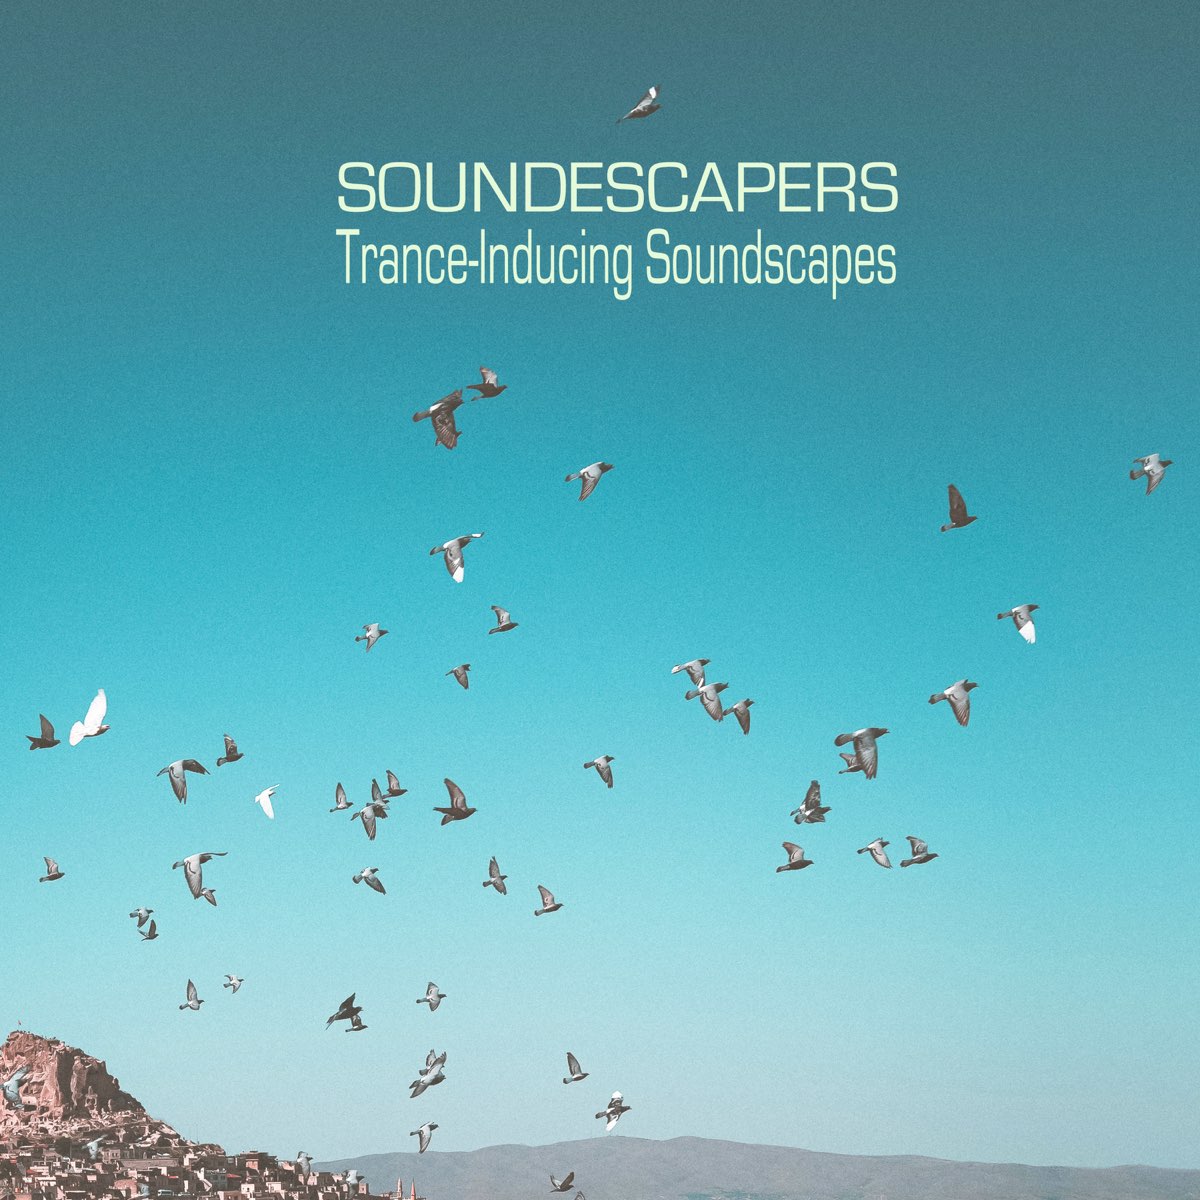 Trance-Inducing Soundscapes by SoundEscapers on Apple Music